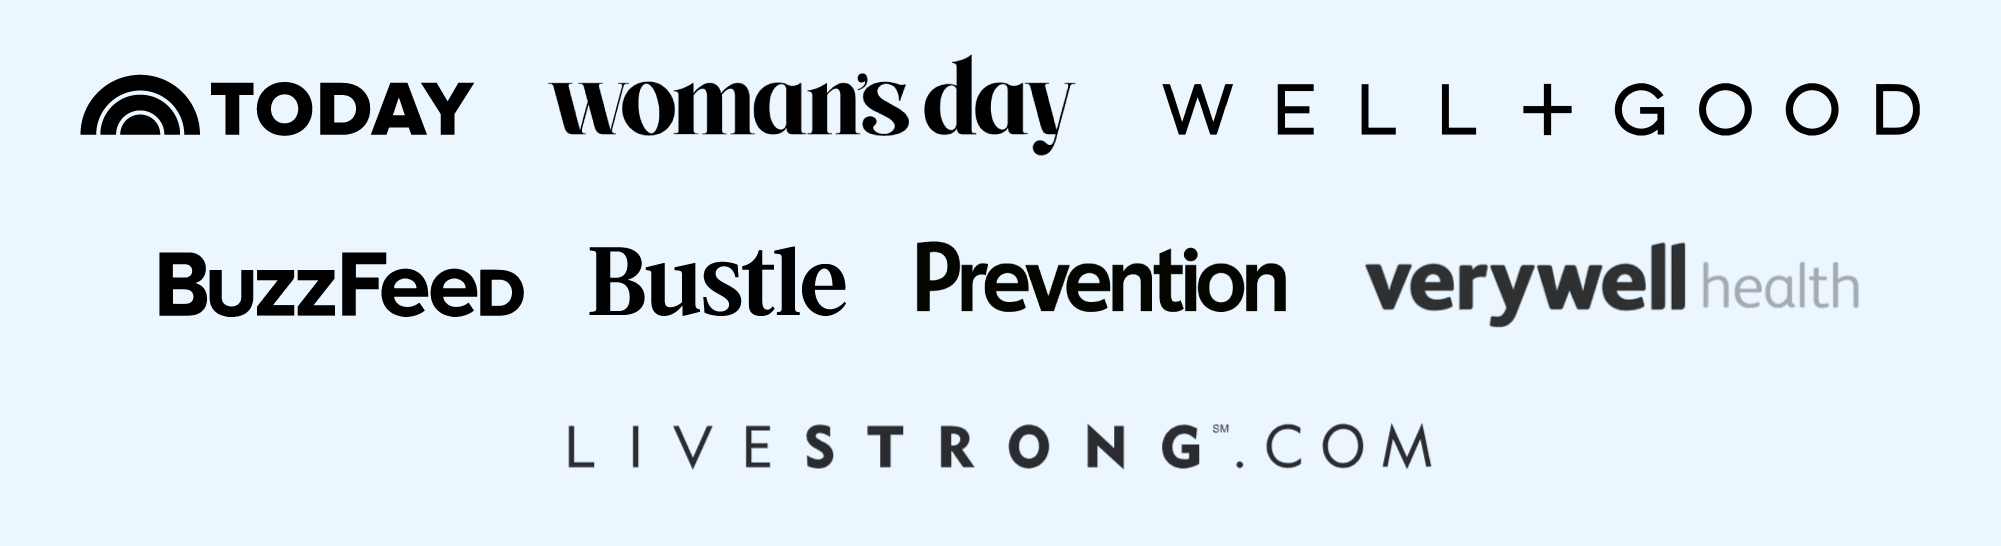 Logos: Today, Women's Day, Well + Good, Buzzfeed, Bustle, Prevention, VeryWell Health, Livestrong.com